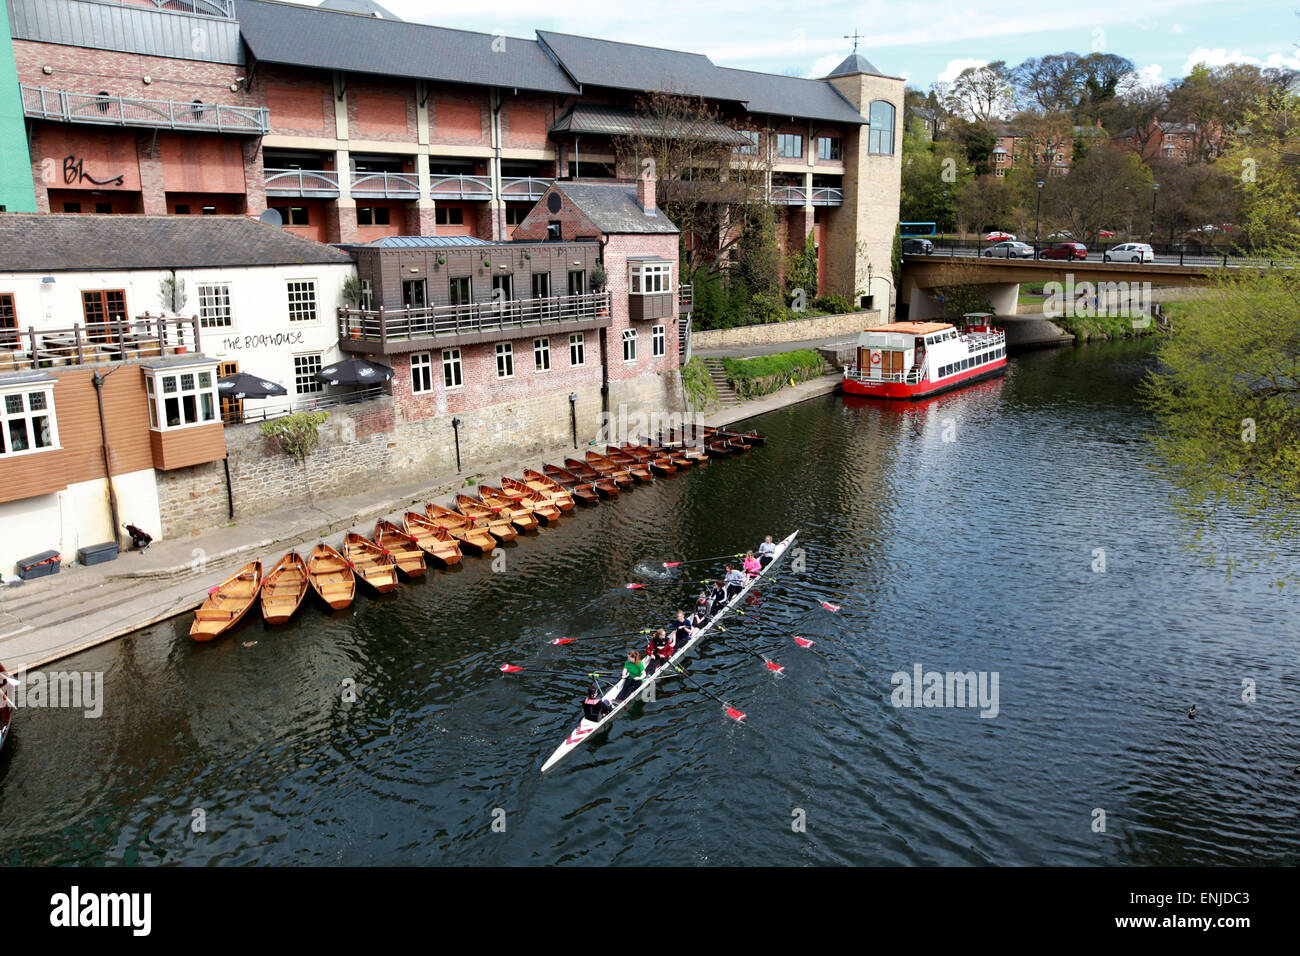 Rowers on the River Wear in Durham Stock Photo